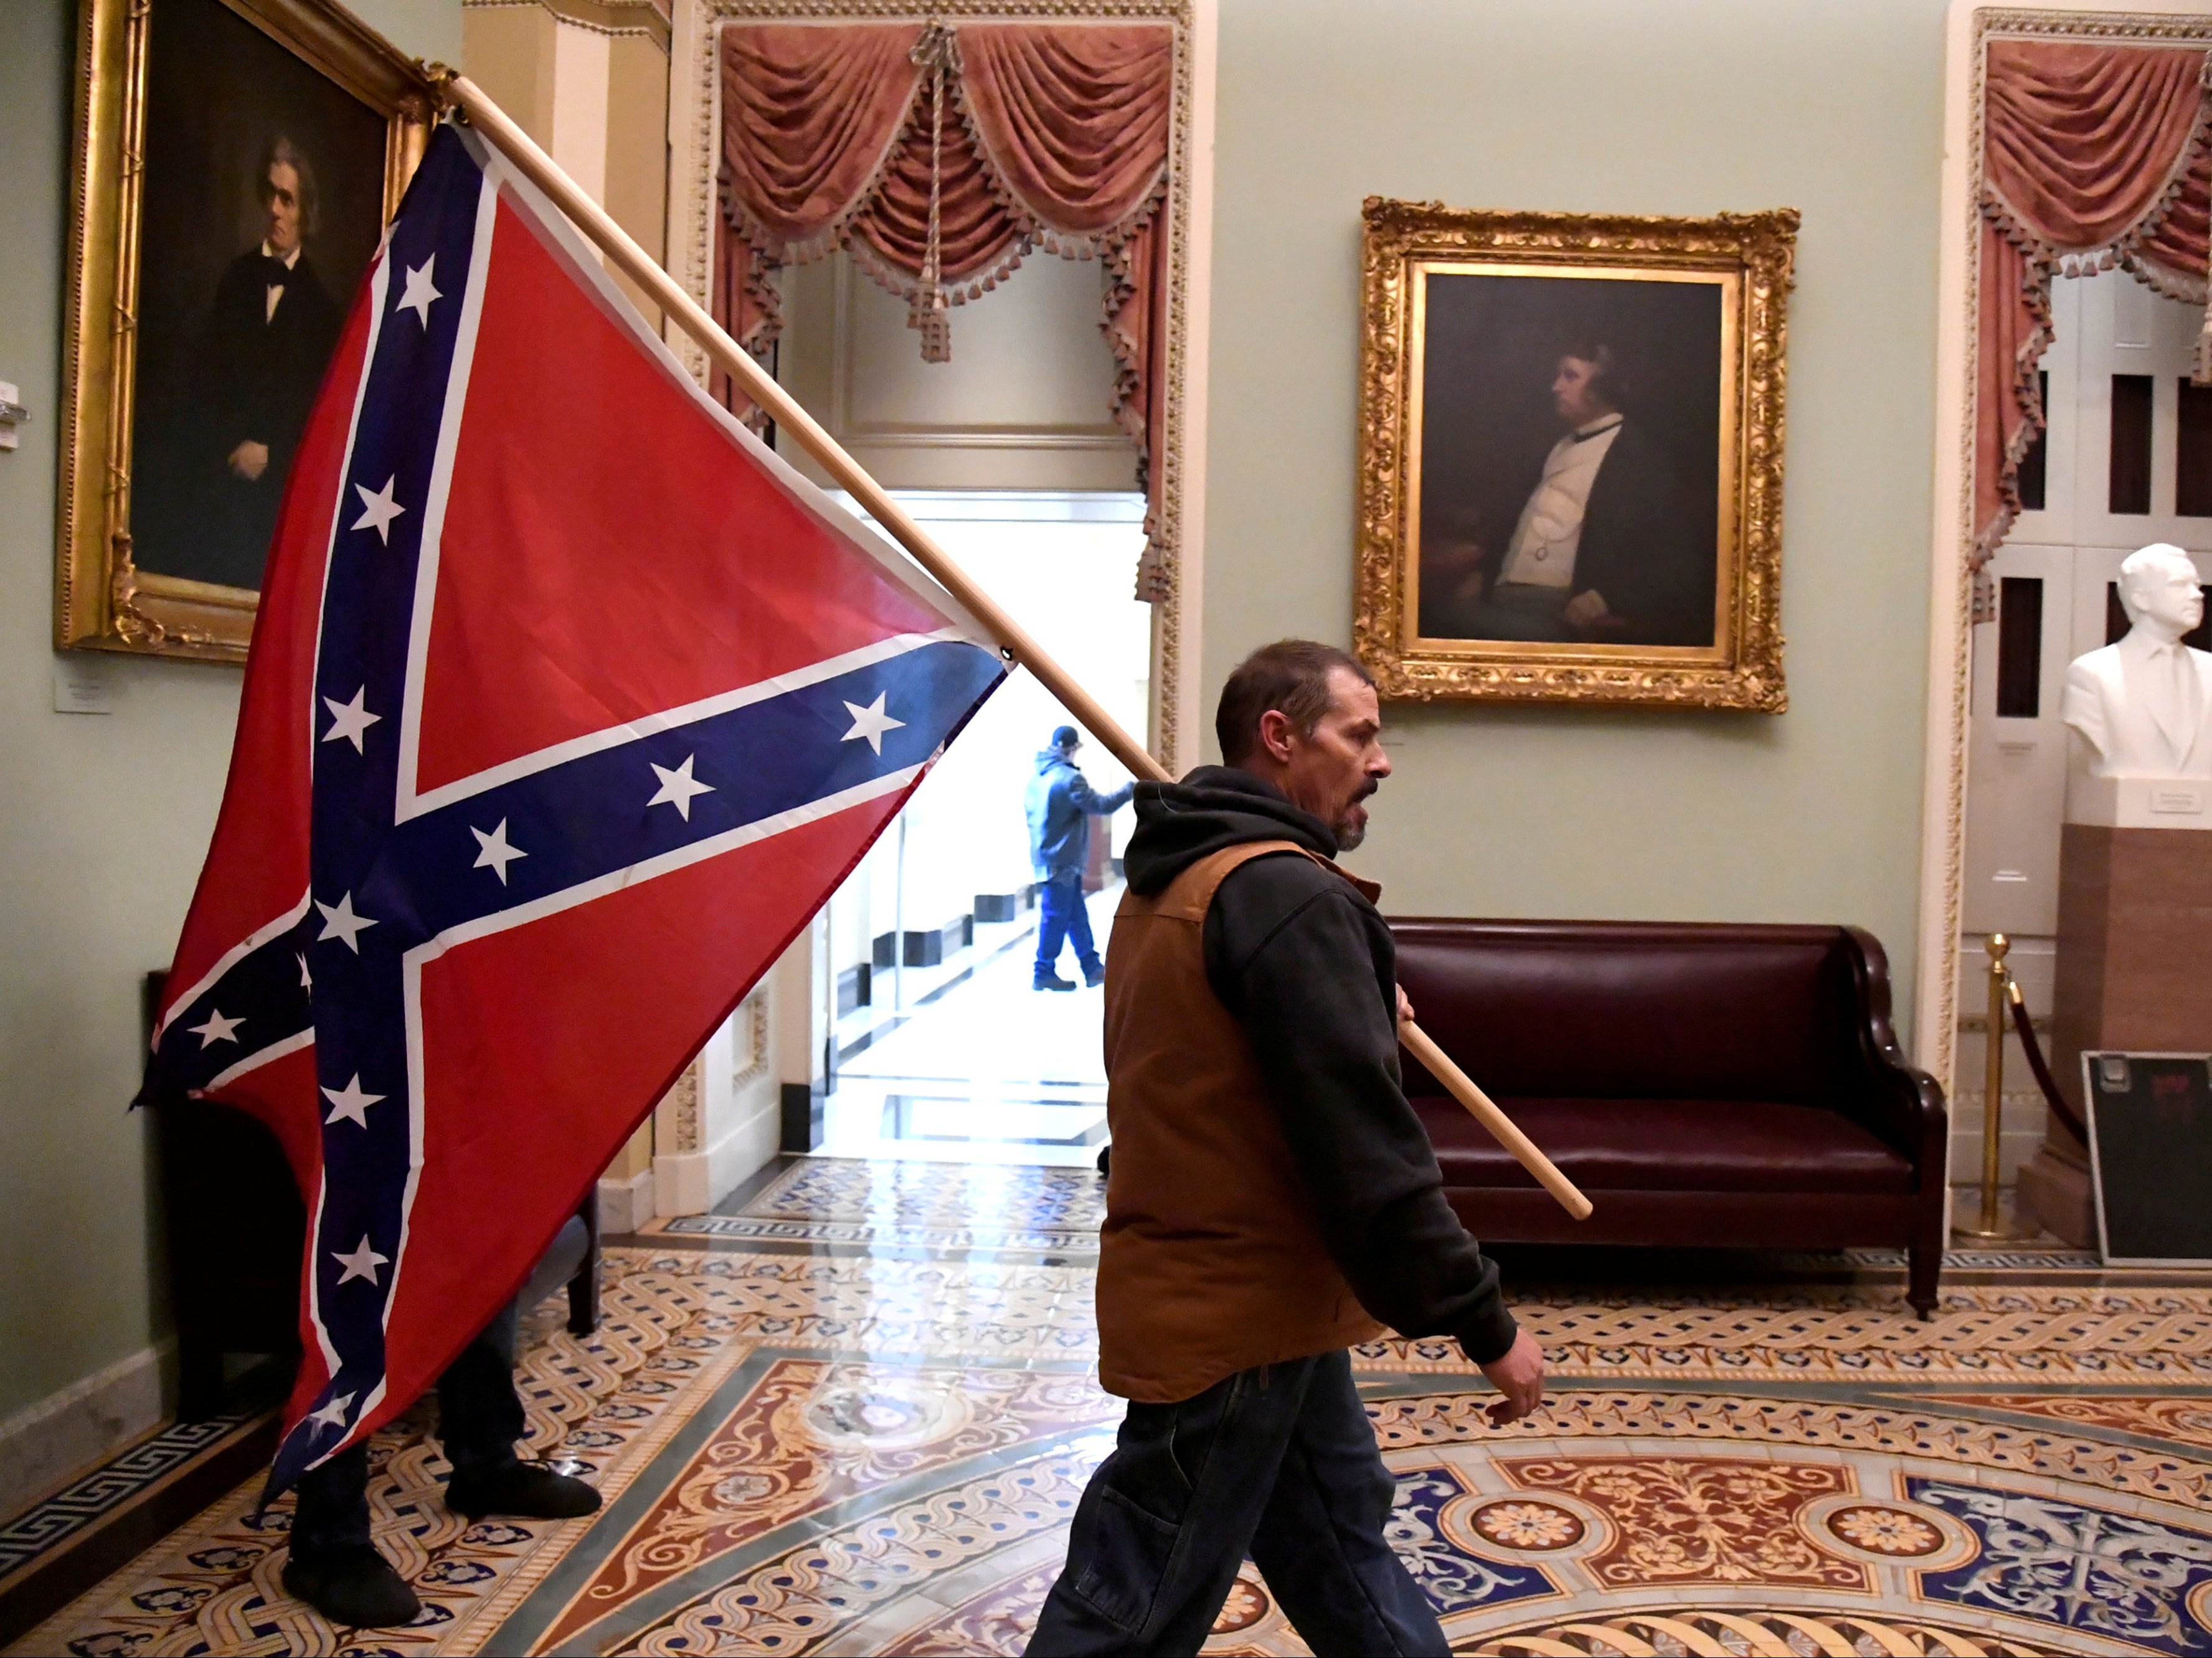 A supporter of President Donald Trump carries a Confederate battle flag on the second floor of the U.S. Capitol near the entrance to the Senate after breaching security defences, in Washington, on 6 January 2021